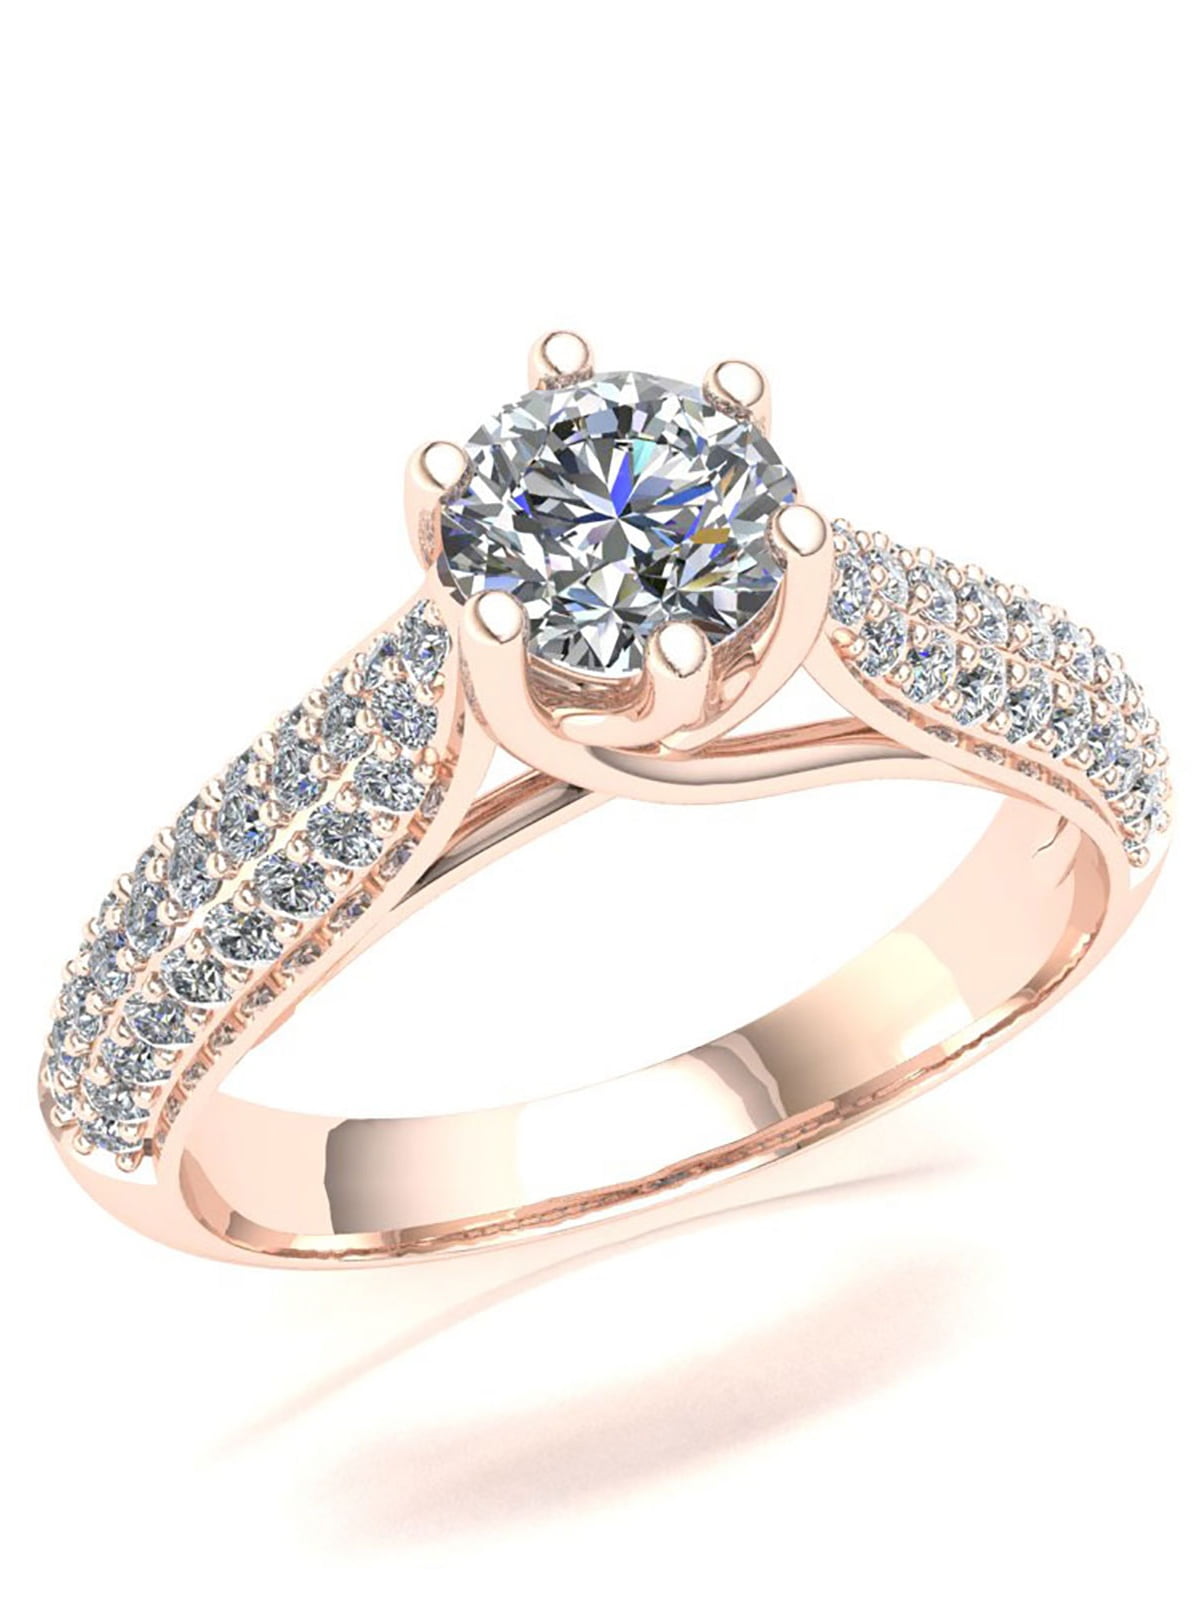 Details about   1ct Real Certified White Round Moissanite Diamond 10K Solid Gold Engagement Ring 